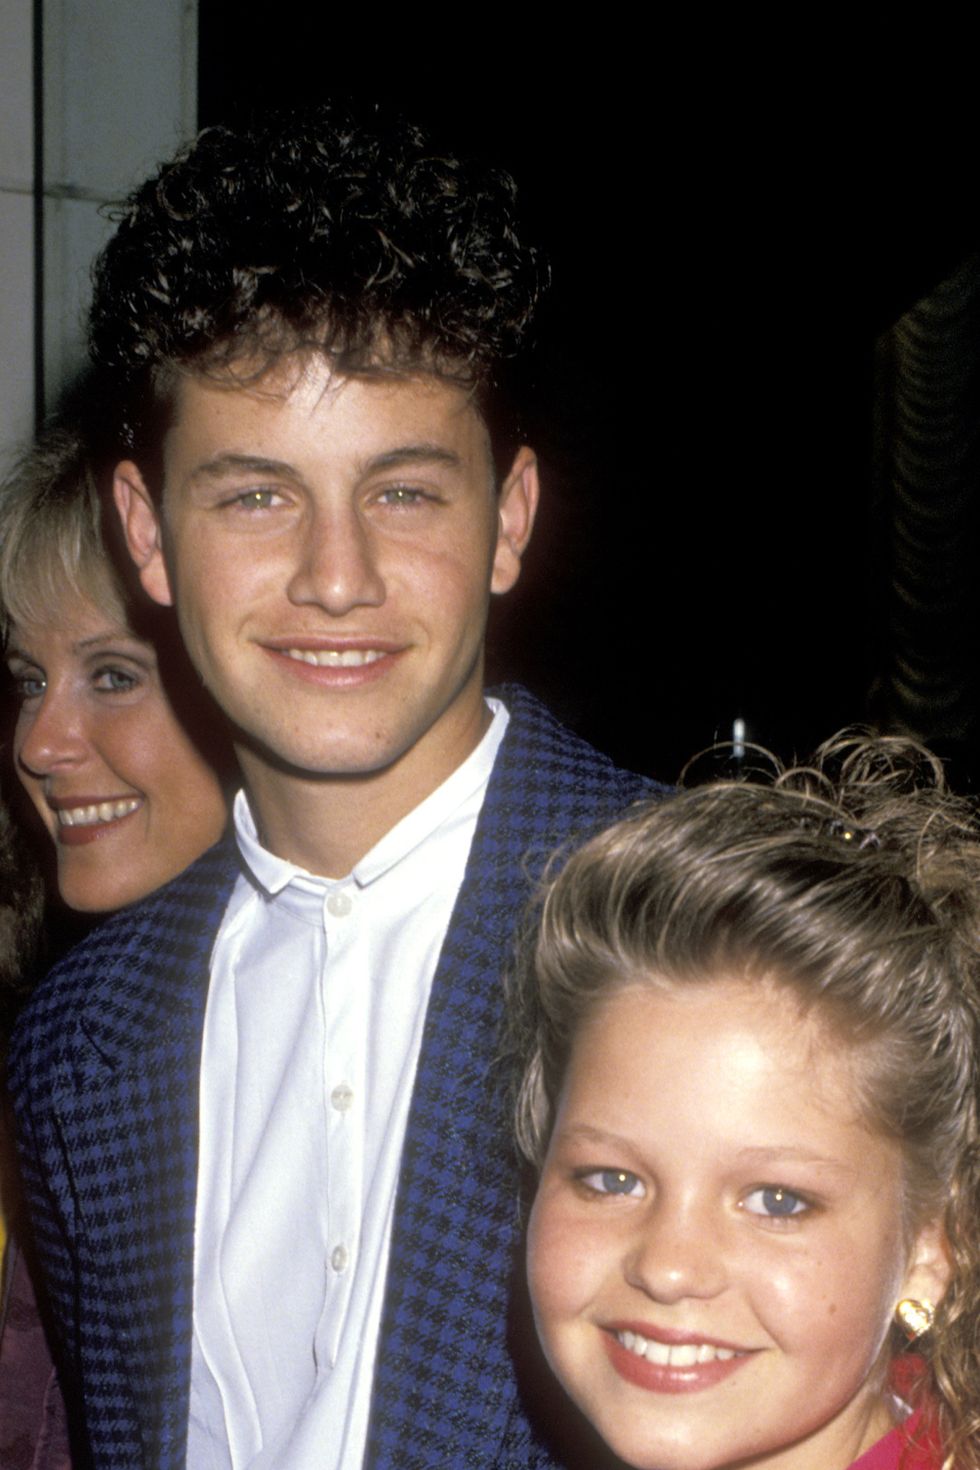 https://hips.hearstapps.com/hmg-prod/images/actress-candace-cameron-and-actor-kirk-cameron-attend-the-news-photo-155522160-1561059650.jpg?crop=0.516xw:0.544xh;0.454xw,0.266xh&resize=980:*